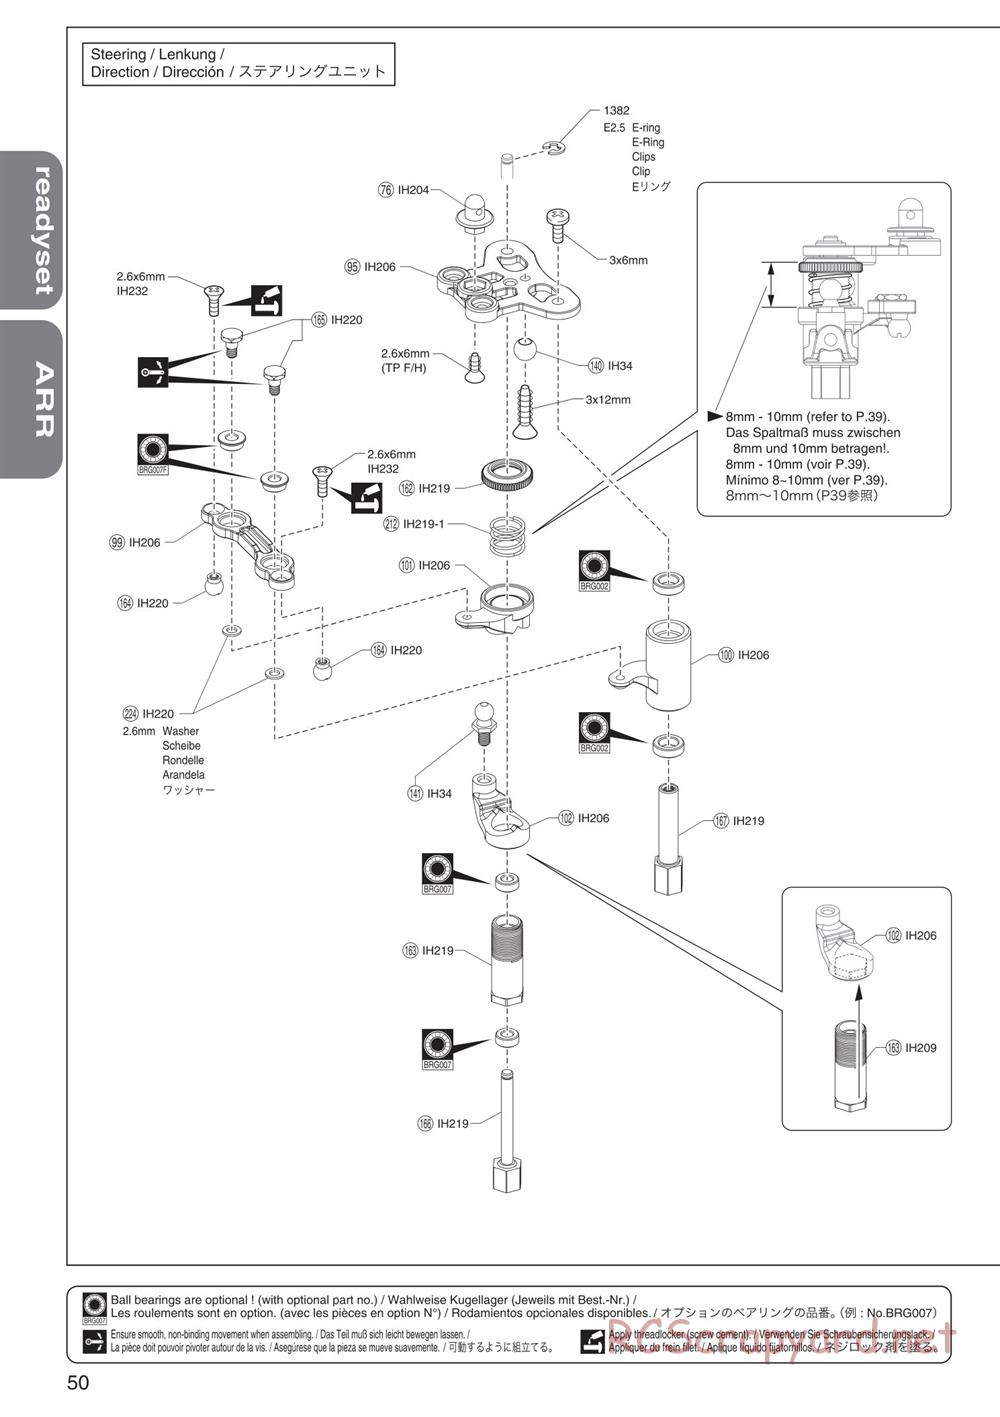 Kyosho - Mini Inferno 09 - Exploded Views - Page 5